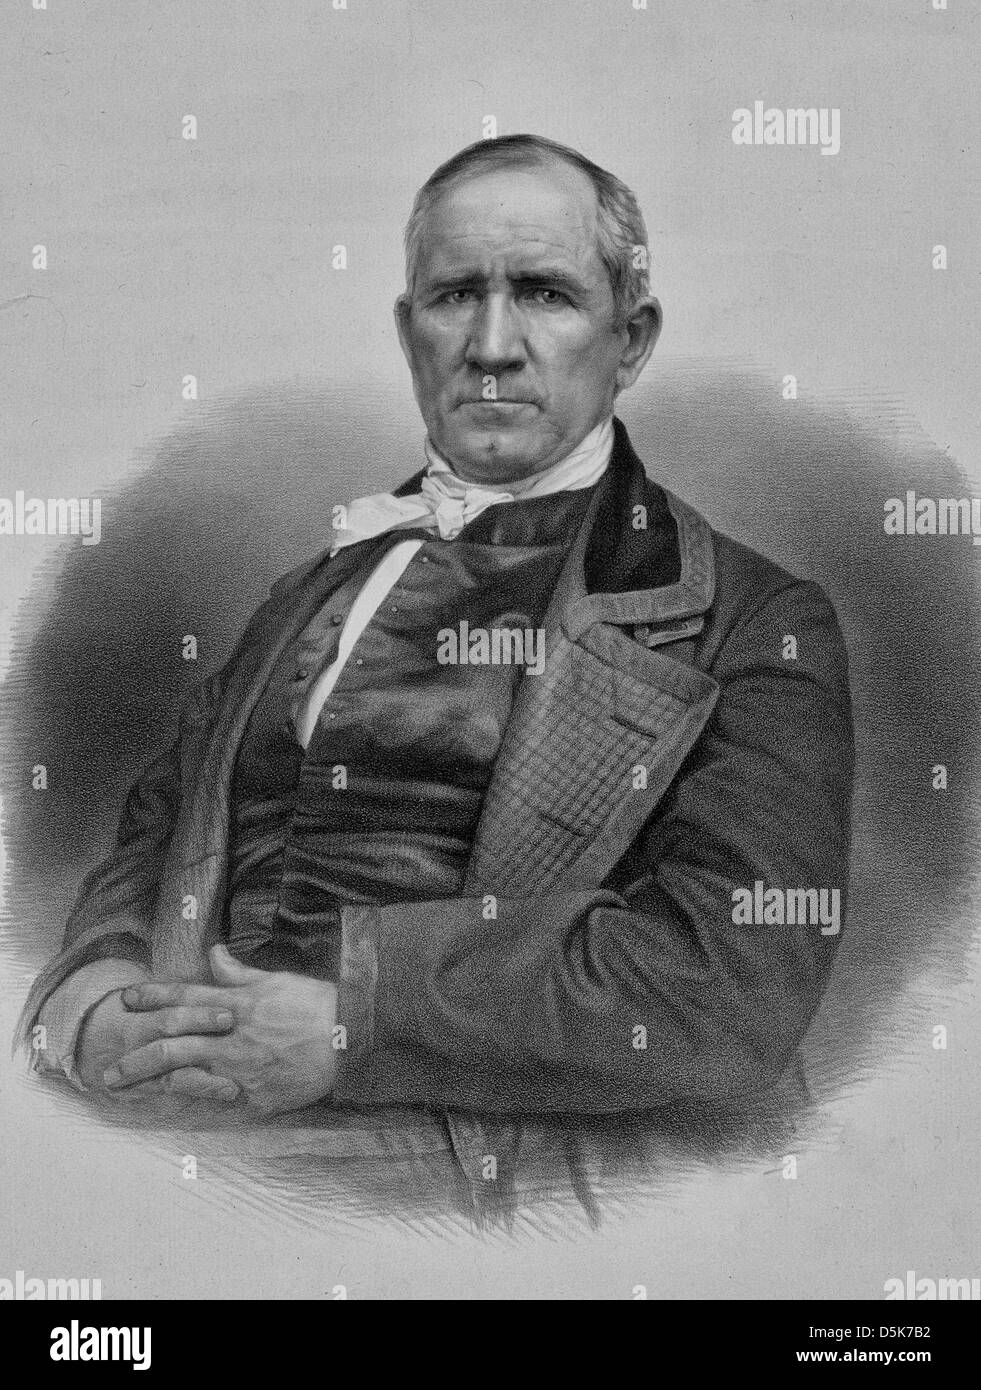 Samuel 'Sam' Houston was a nineteenth-century American statesman, politician, and soldier. He is best known for his leading role in bringing Texas into the United States, circa 1848 Stock Photo